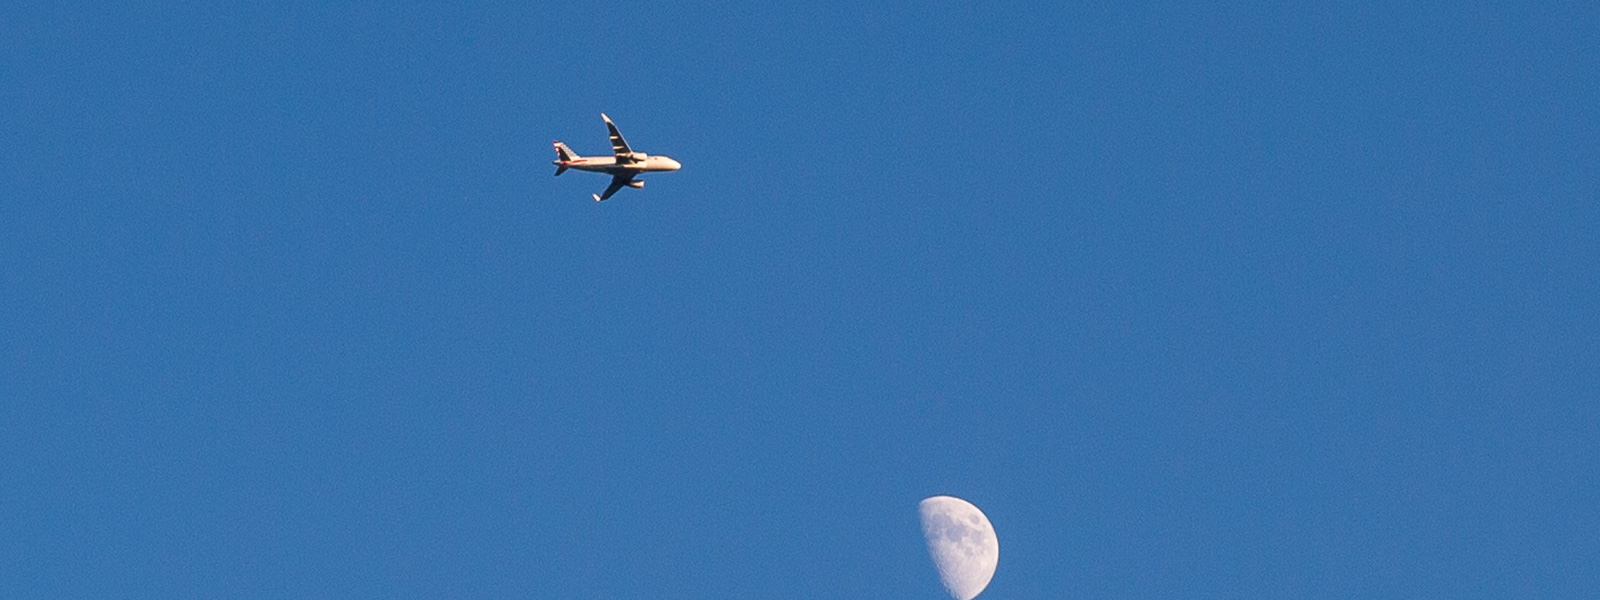 Airplane flying in sky next to moon